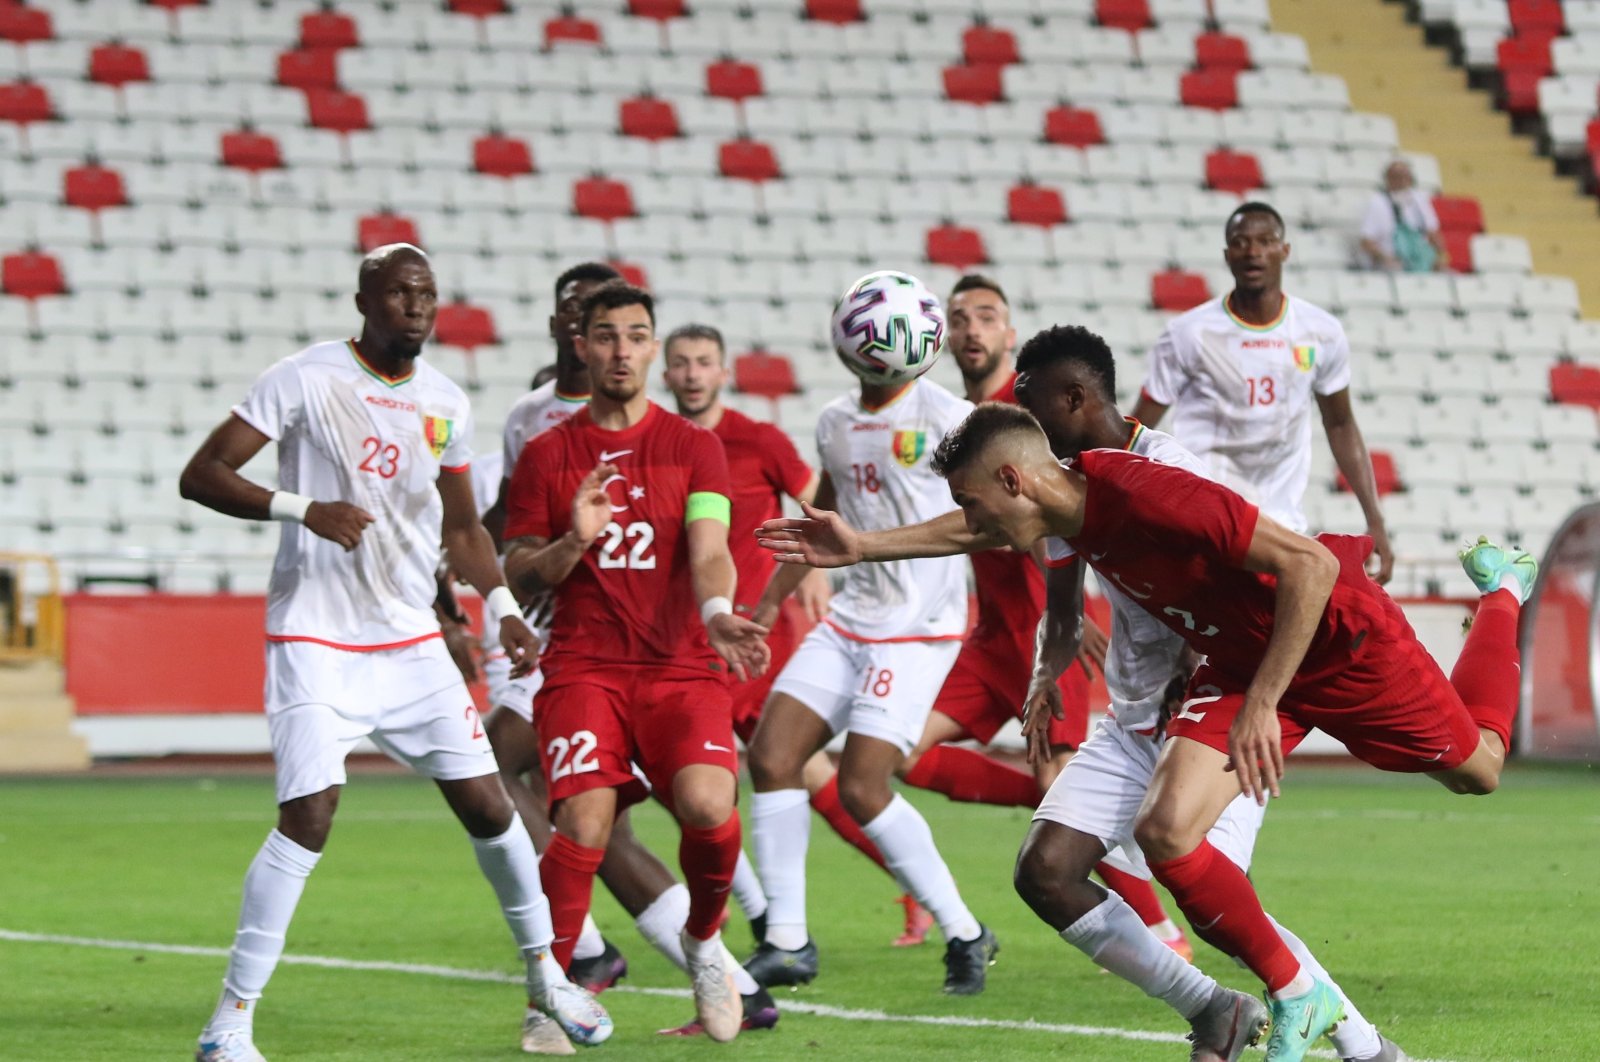 Turkey and Guinea players grapple for the ball during a friendly match at Antalya Stadium in Antalya, Turkey, May 31, 2021. (IHA Photo)